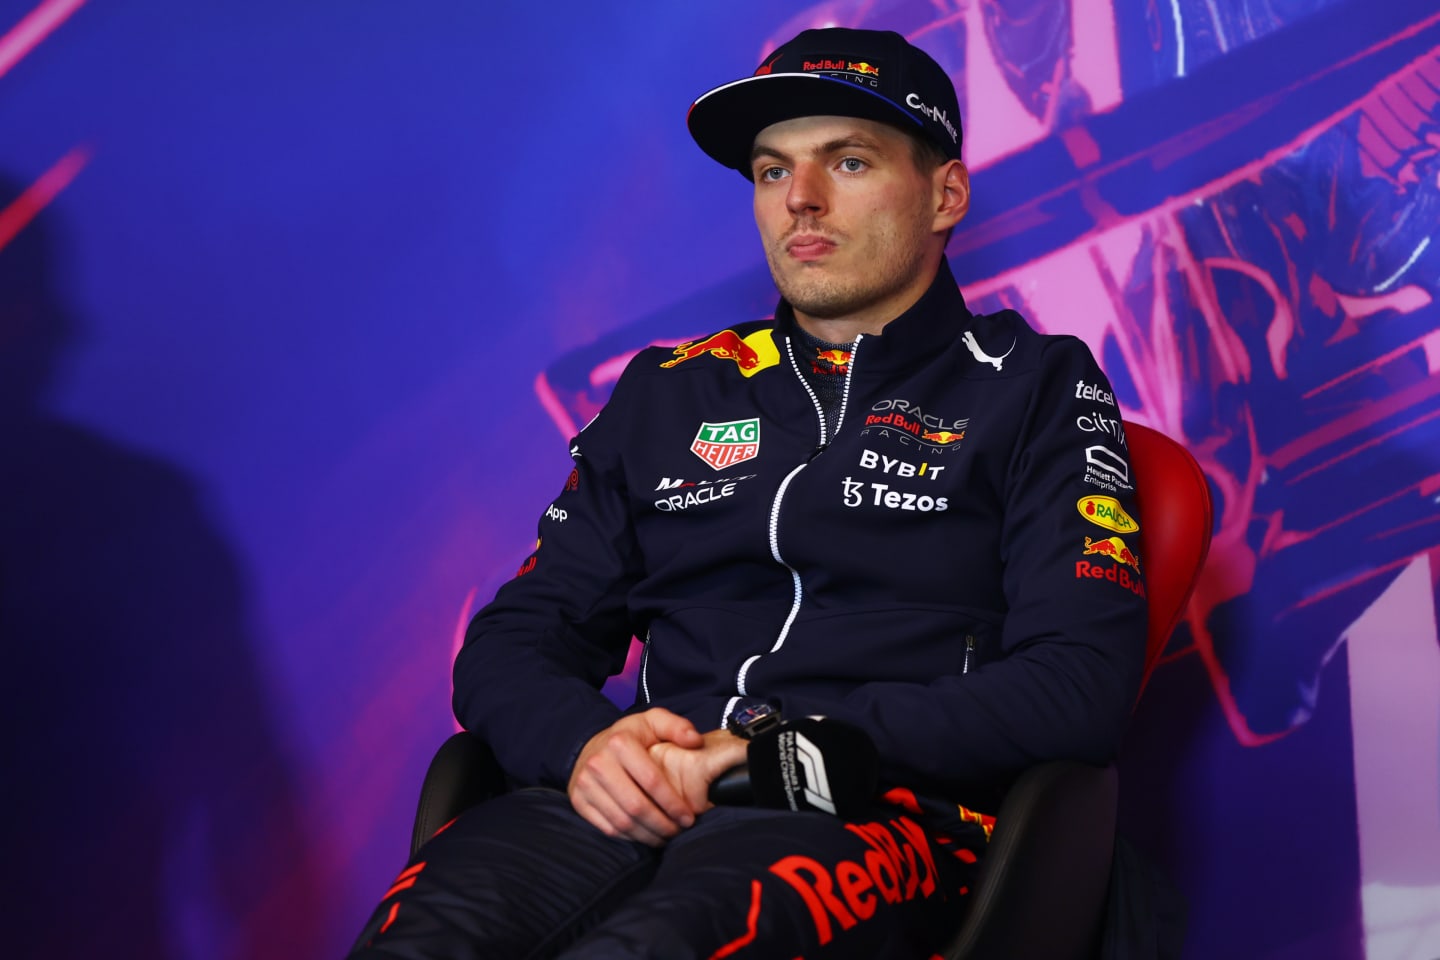 MONTREAL, QUEBEC - JUNE 18: Pole position qualifier Max Verstappen of the Netherlands and Oracle Red Bull Racing looks on in the press conference after qualifying ahead of the F1 Grand Prix of Canada at Circuit Gilles Villeneuve on June 18, 2022 in Montreal, Quebec. (Photo by Lars Baron/Getty Images)